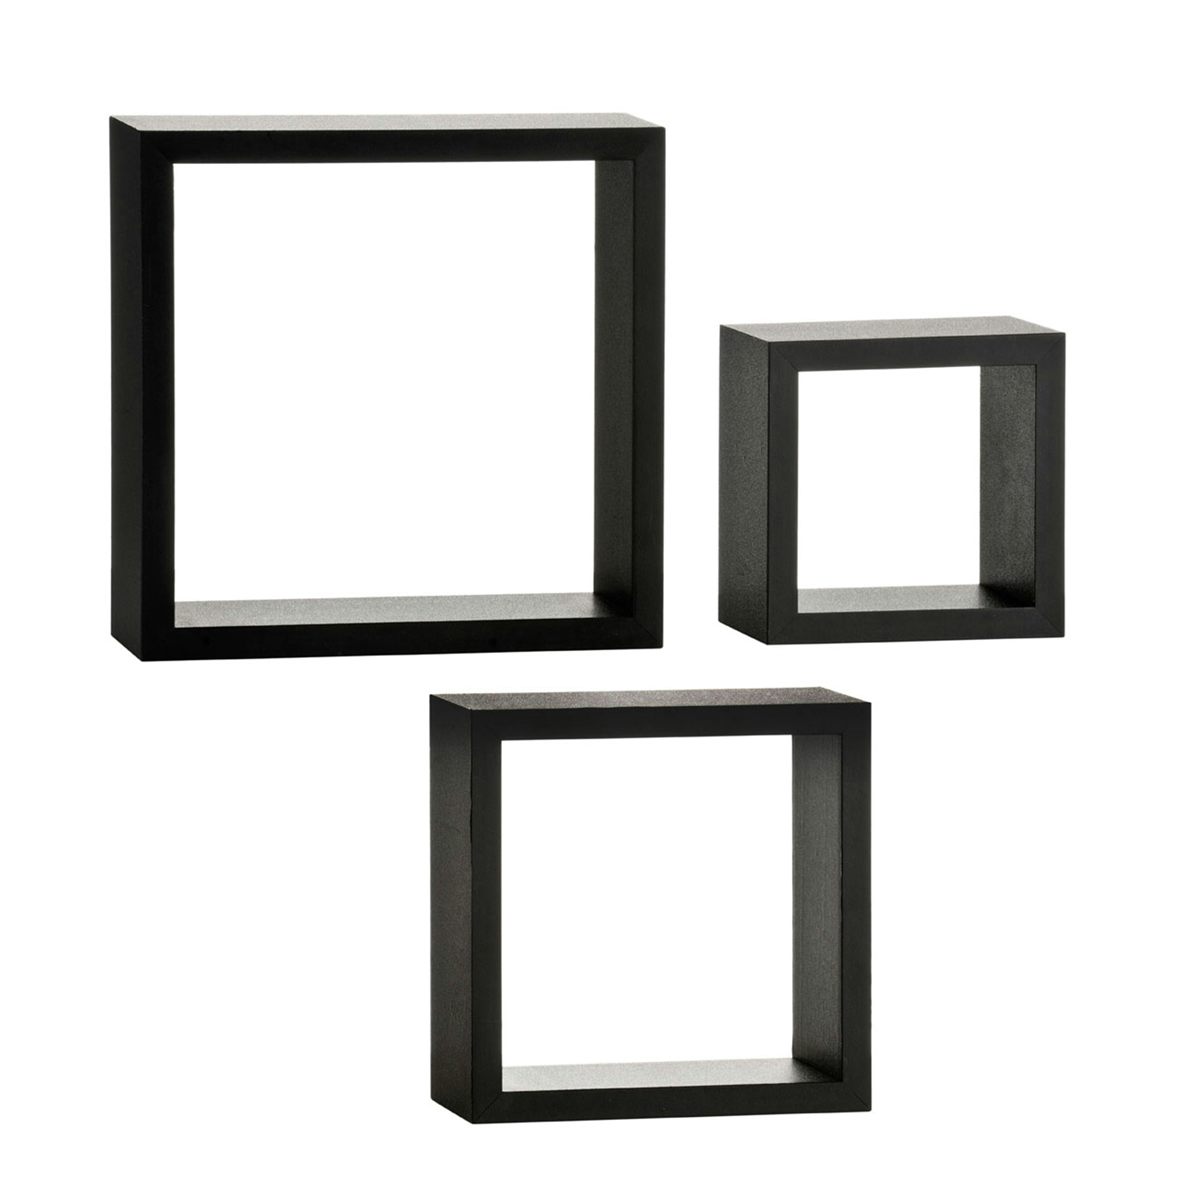 Accents Set of 3 black wall cubes